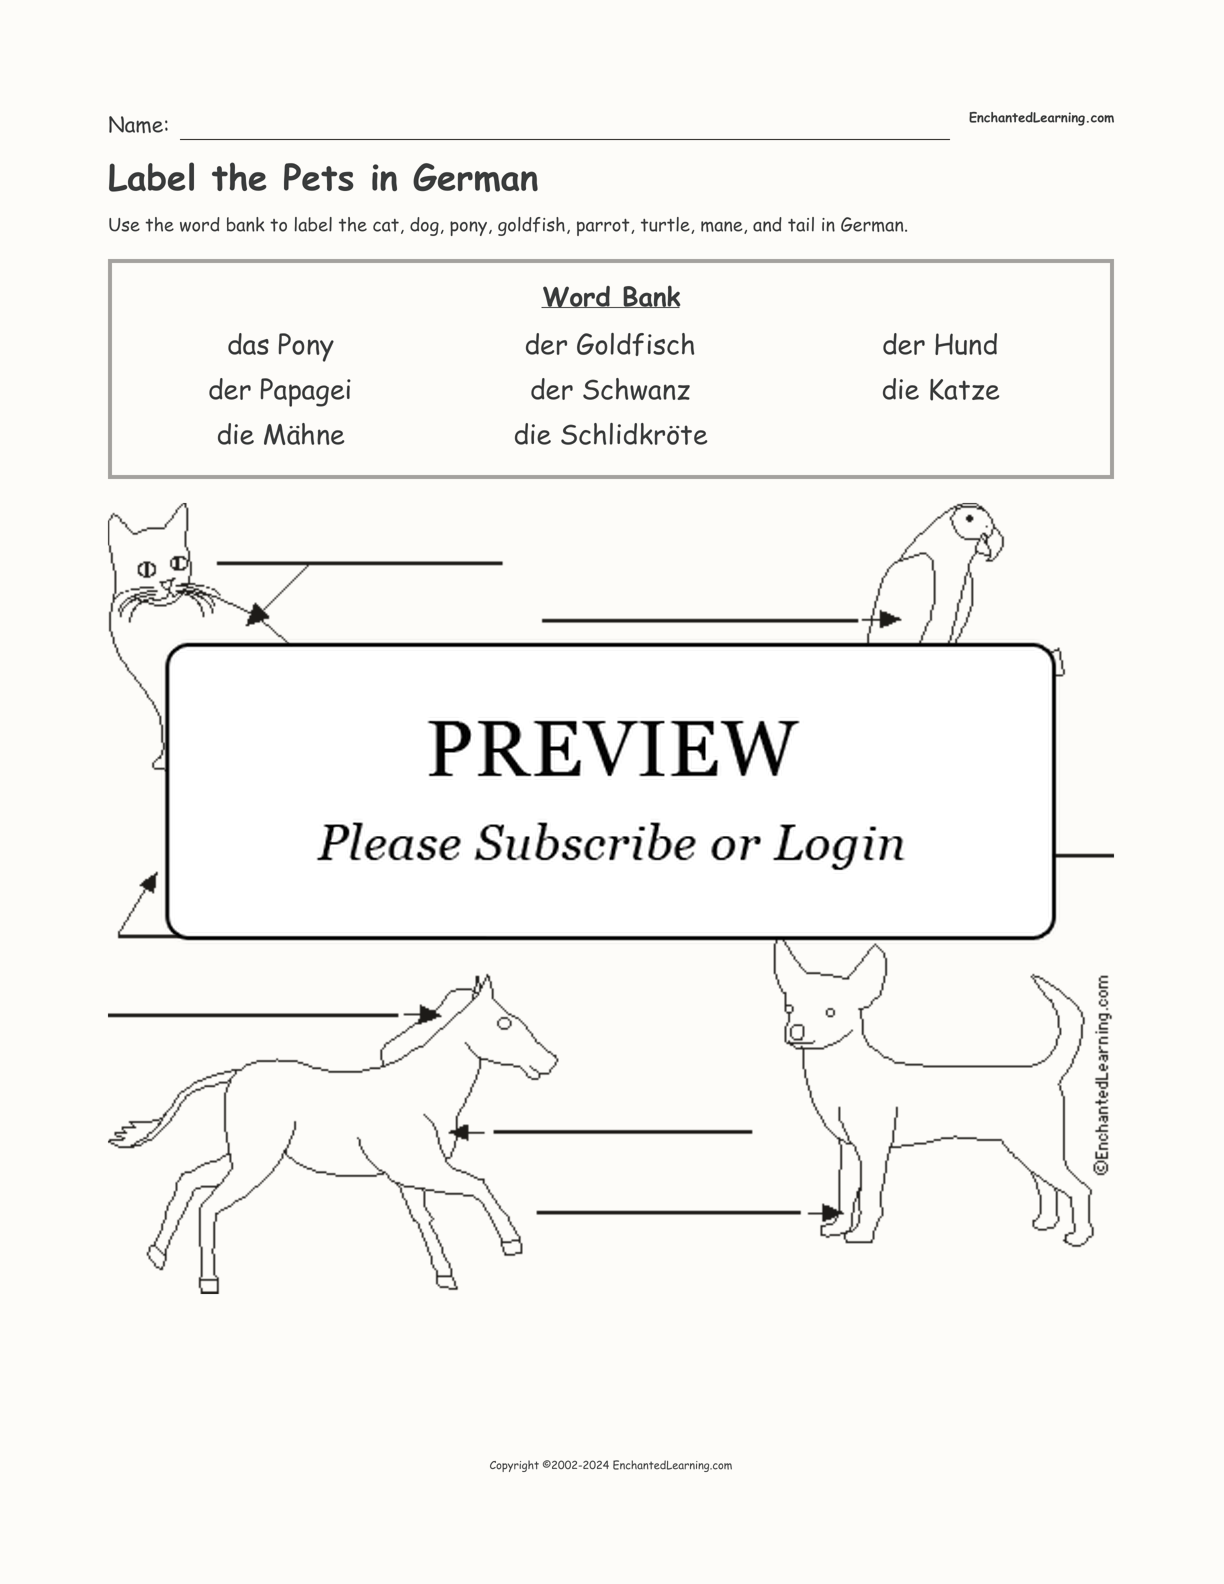 Label the Pets in German interactive worksheet page 1